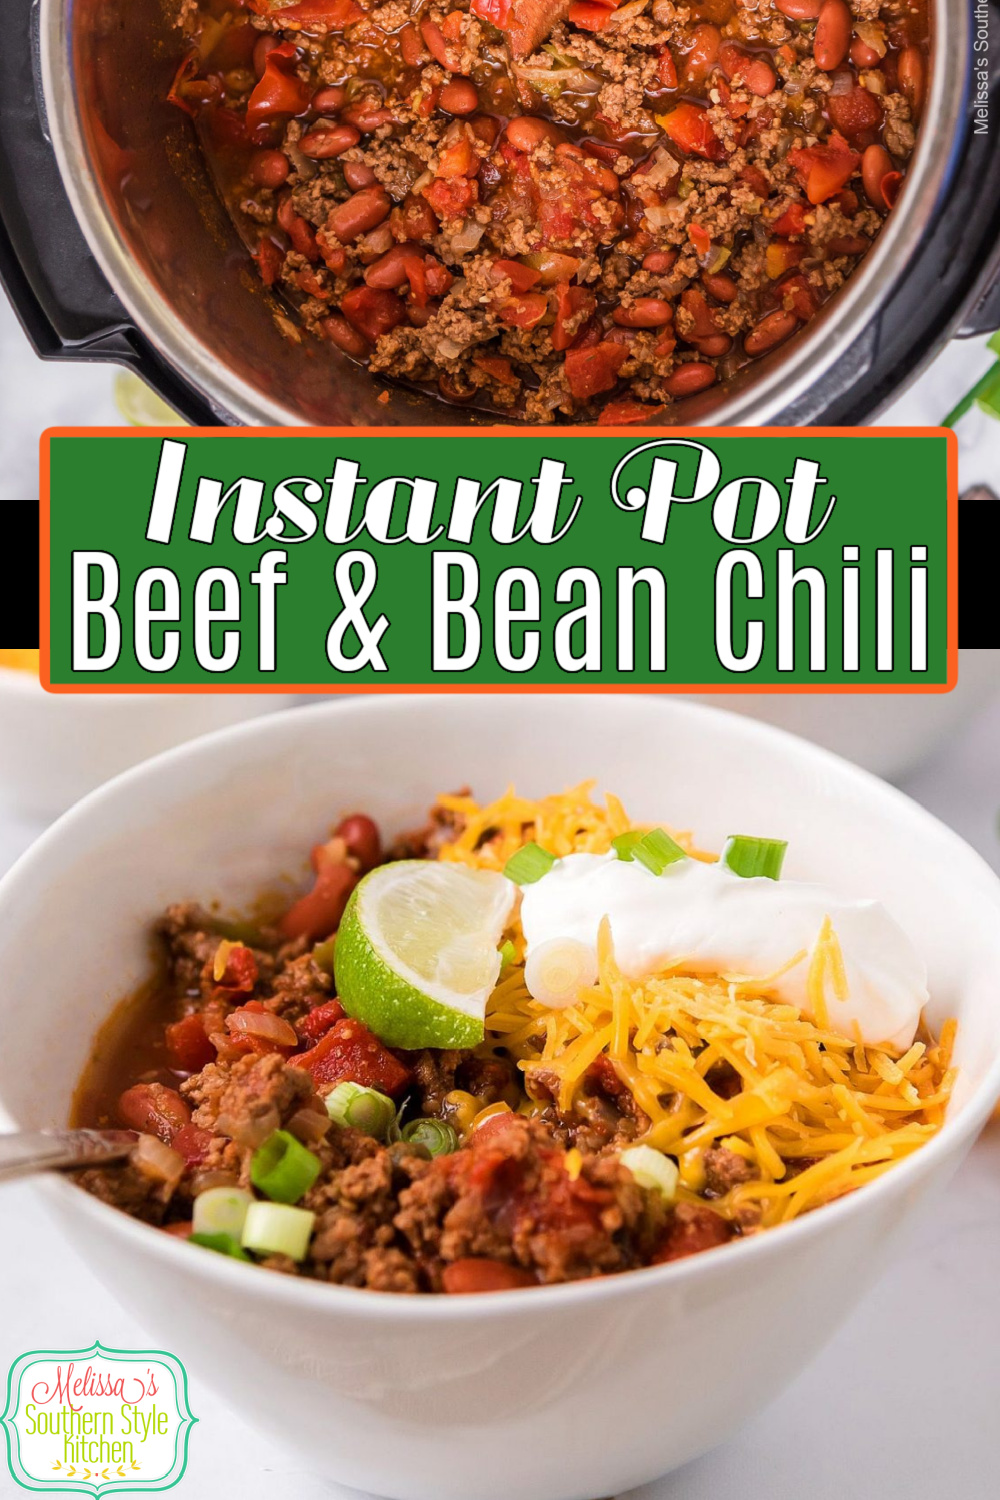 Instant Pot Beef and Bean Chili is packed with flavor. It makes a fun supper or game day snack in no time flat #instantpotchili #beefandbeanchili #instantpotrecipes #easygroundbeefrecipes #chilirecipes #chiliwithbeans #dinner #dinnerrecipeideas #southernfood #southernrecipes via @melissasssk